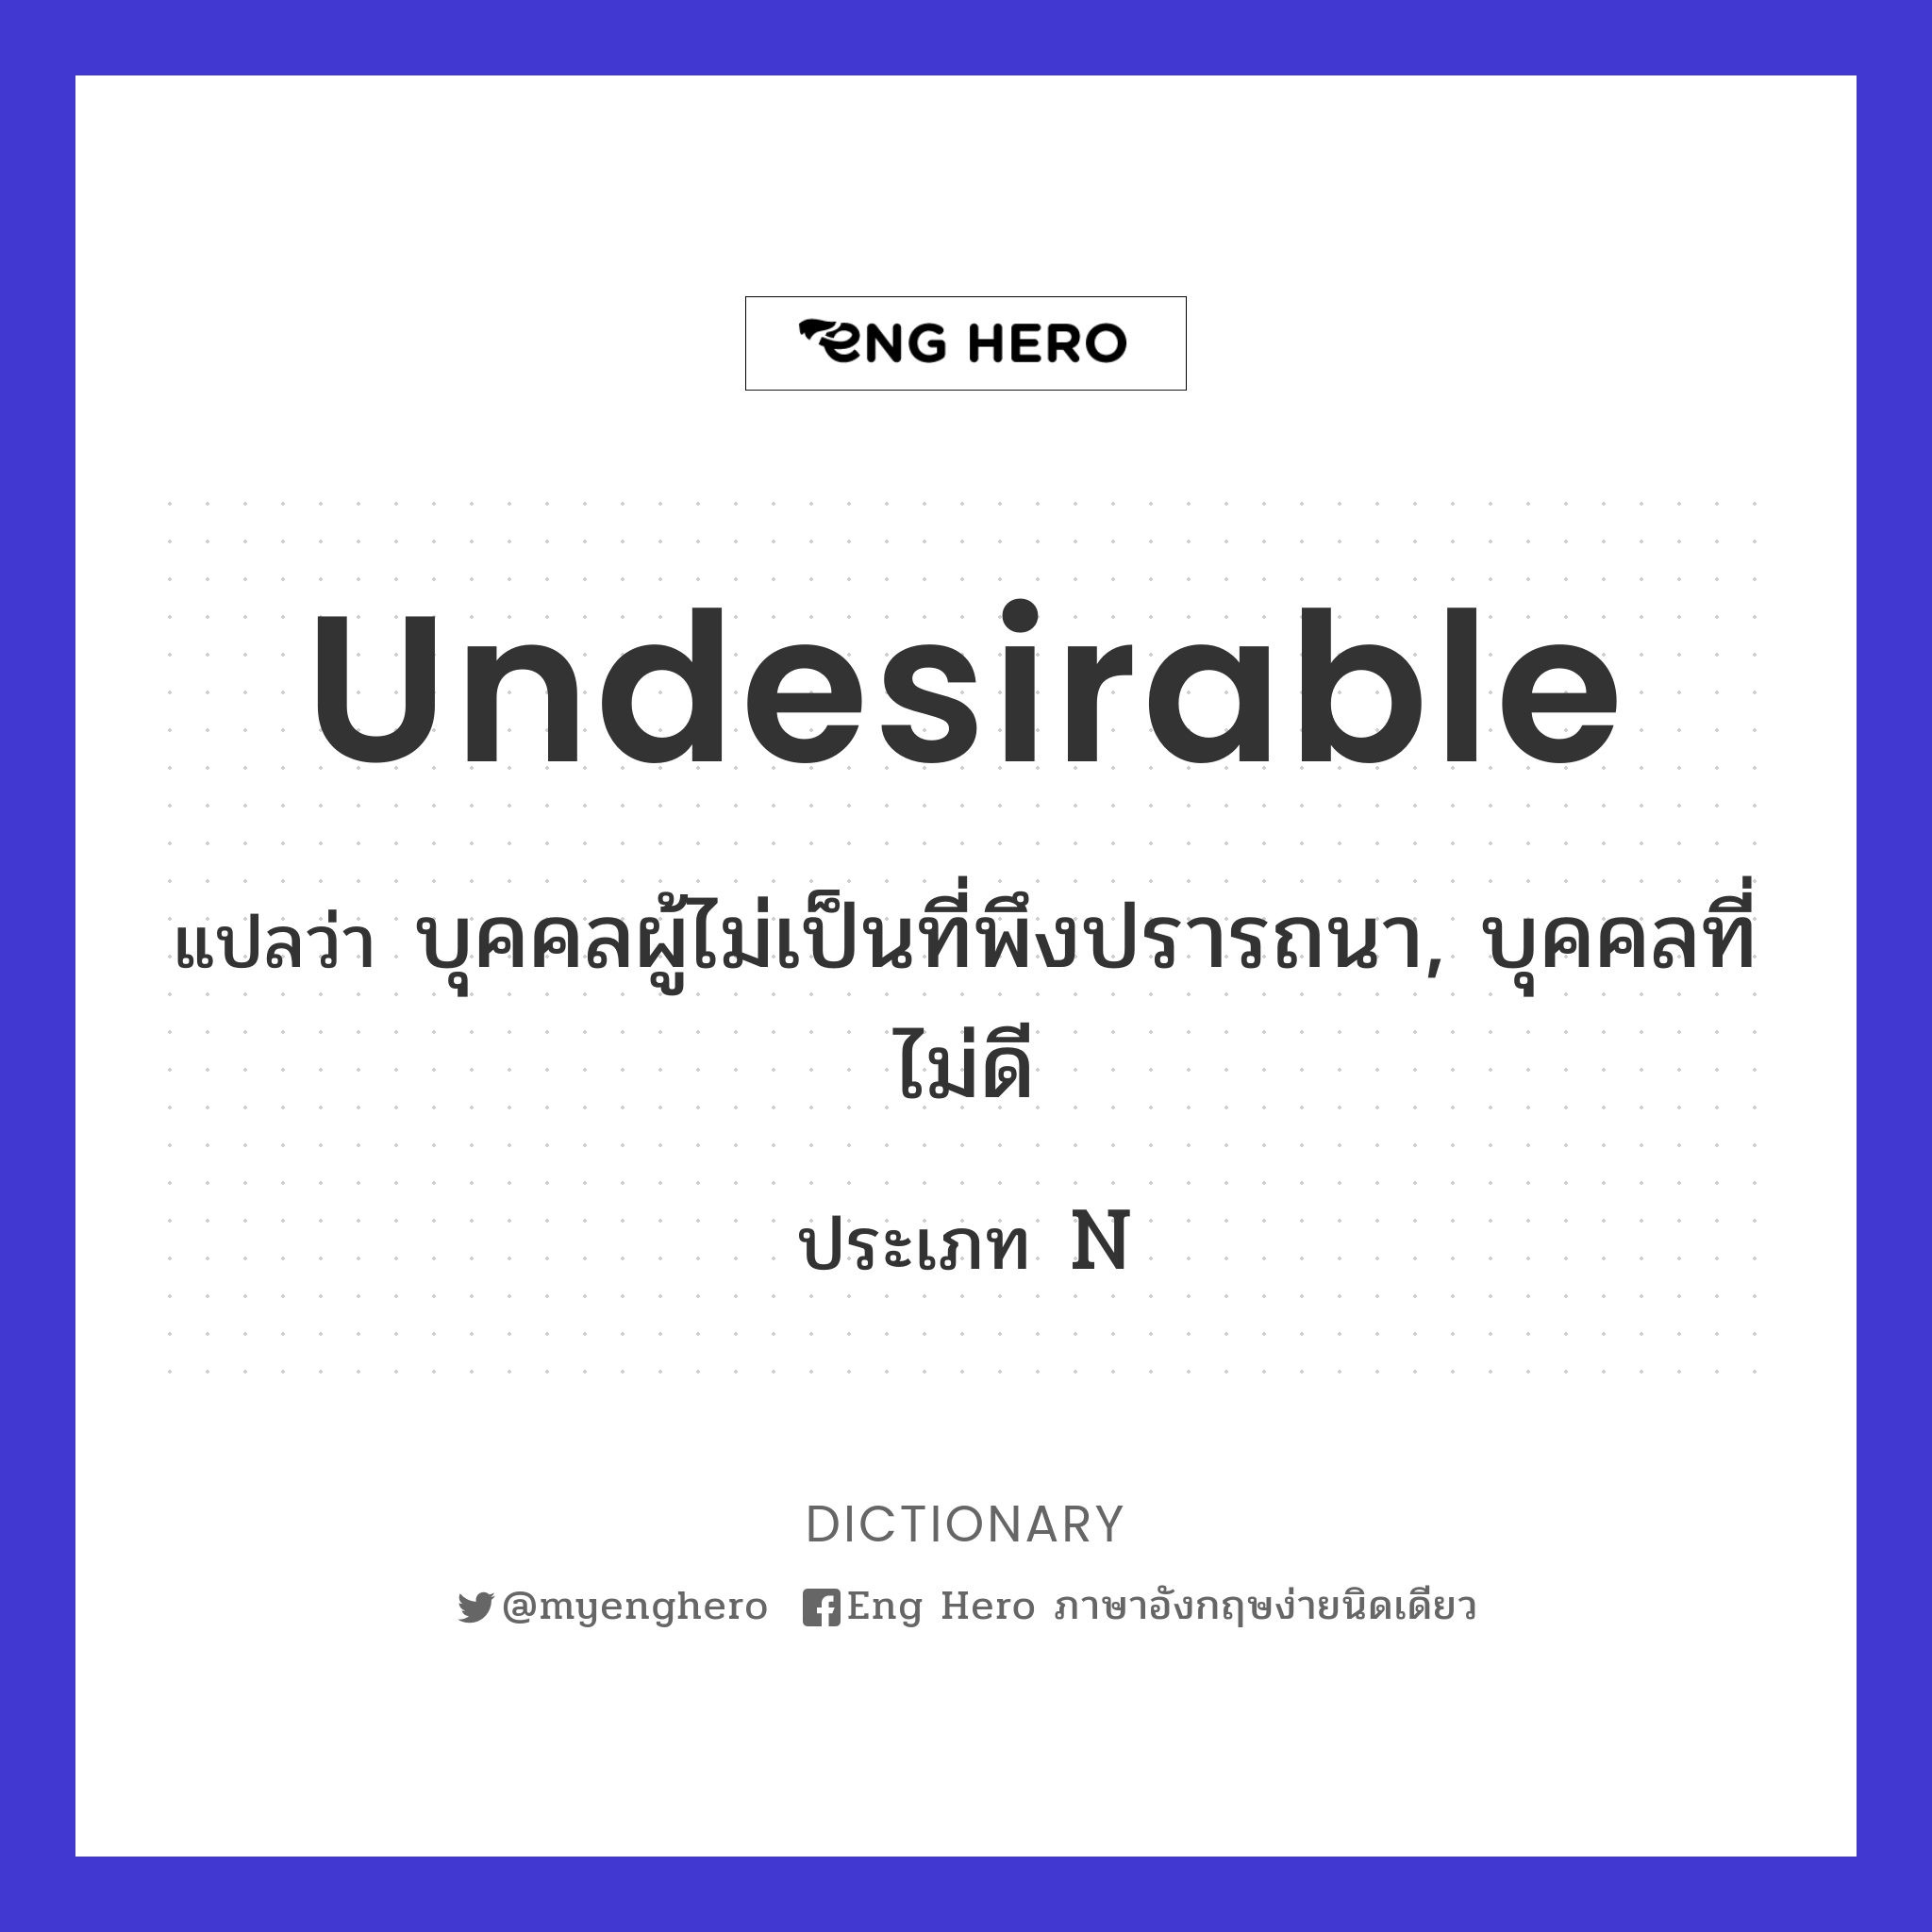 undesirable